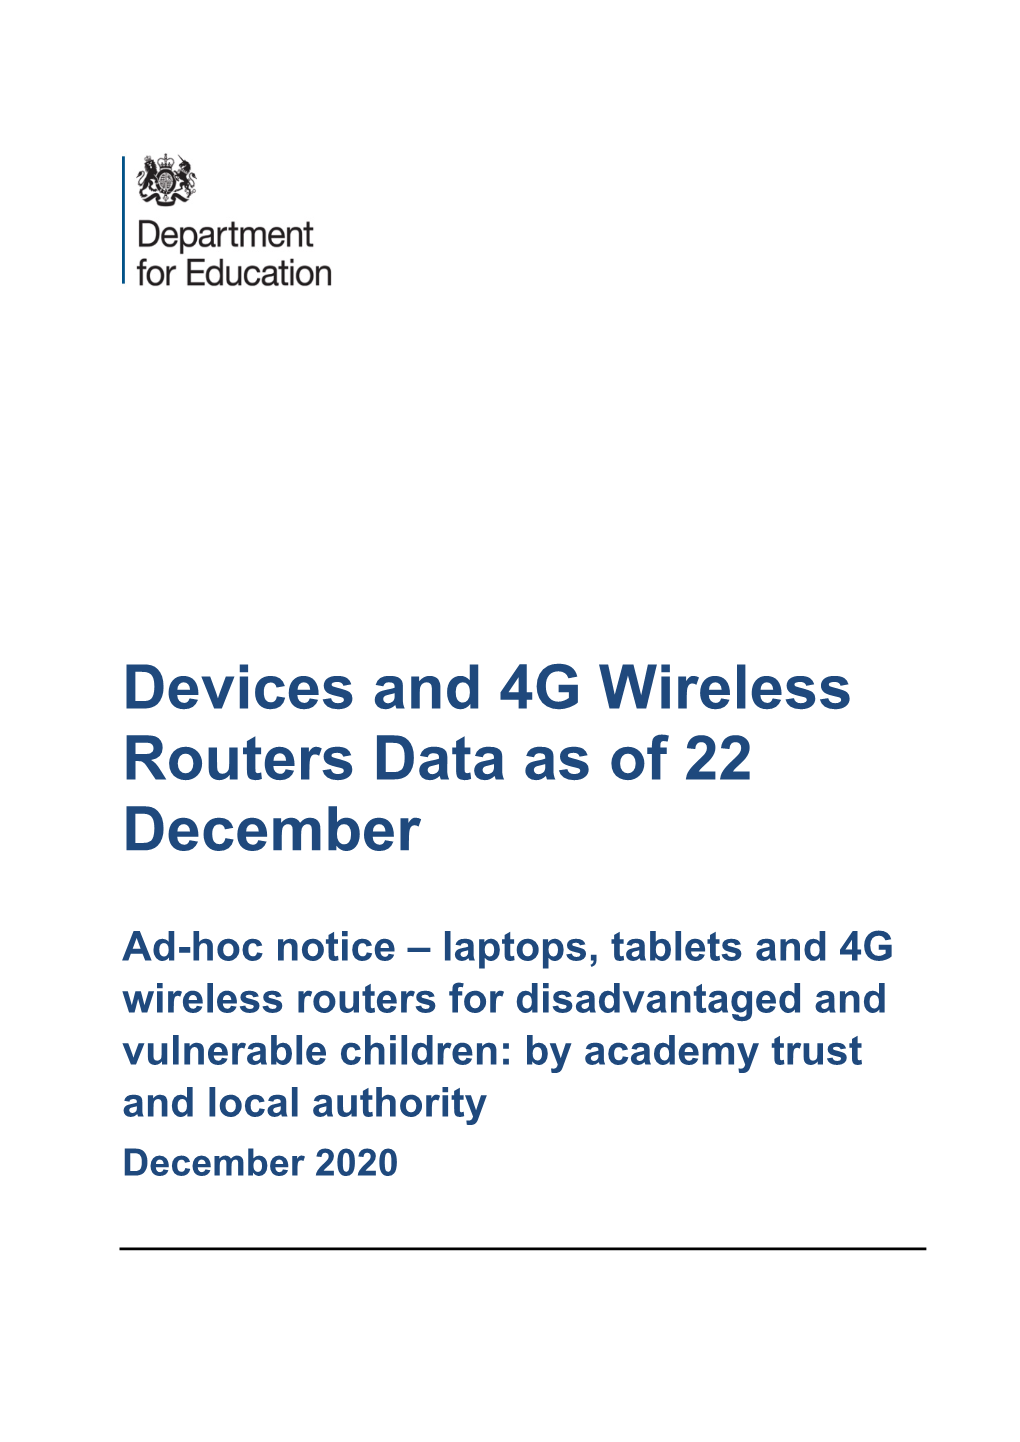 Devices and 4G Wireless Routers Data As of 22 December 2020